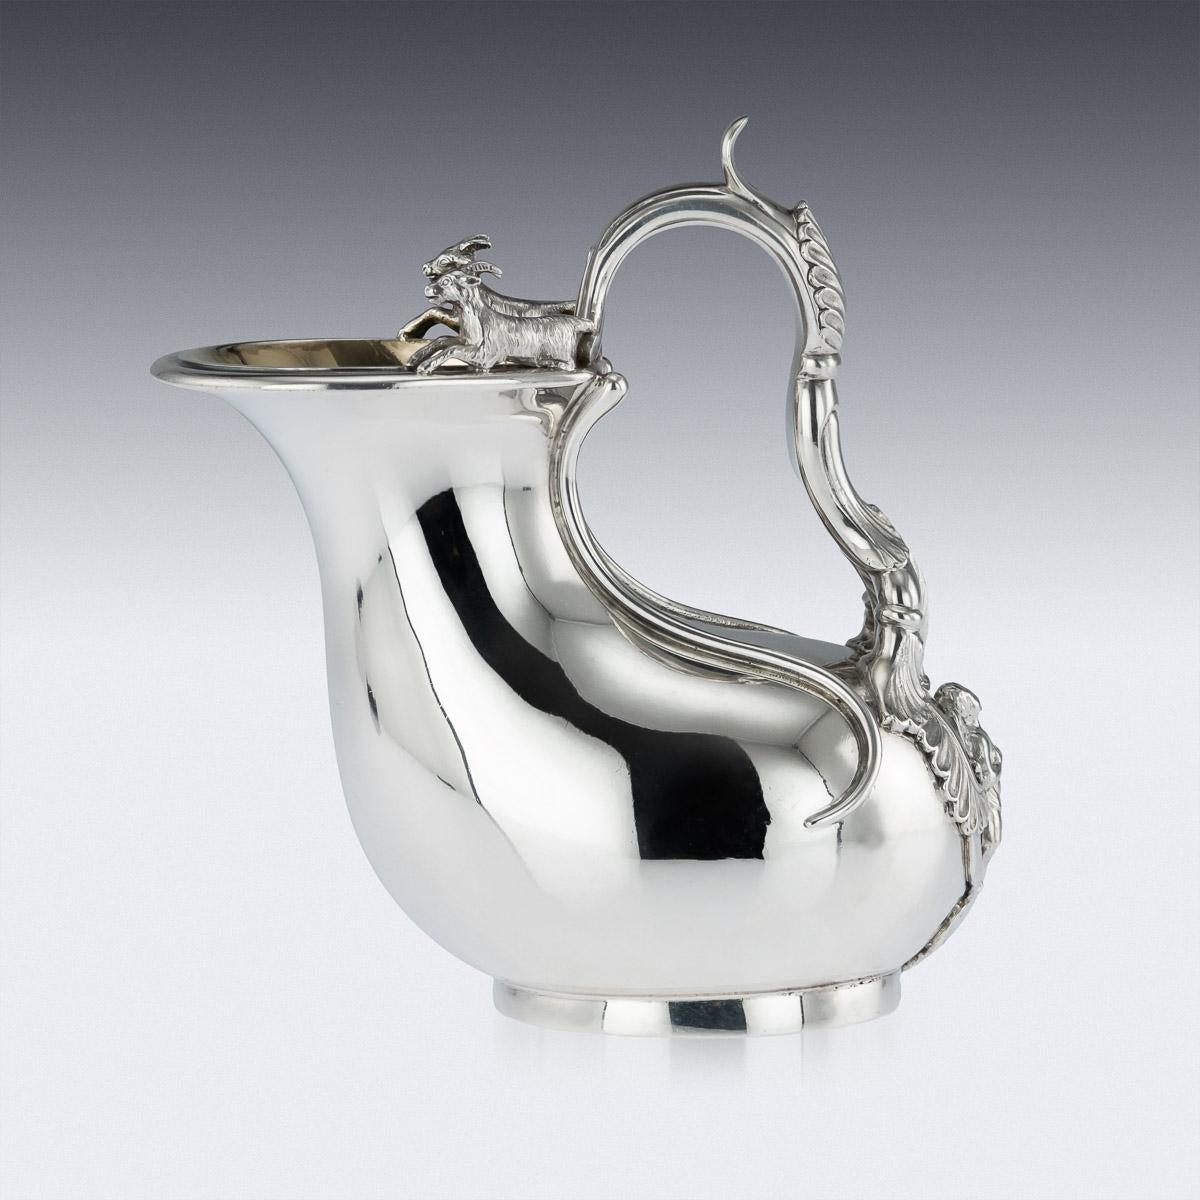 Antique 19th century Regency solid silver Askos jug, applied with an openwork acanthus-capped handle with putto terminal, the rim applied with two fully-modeled rams, inside richly parcel gilt. Hallmarked English silver (925 standard), London, year